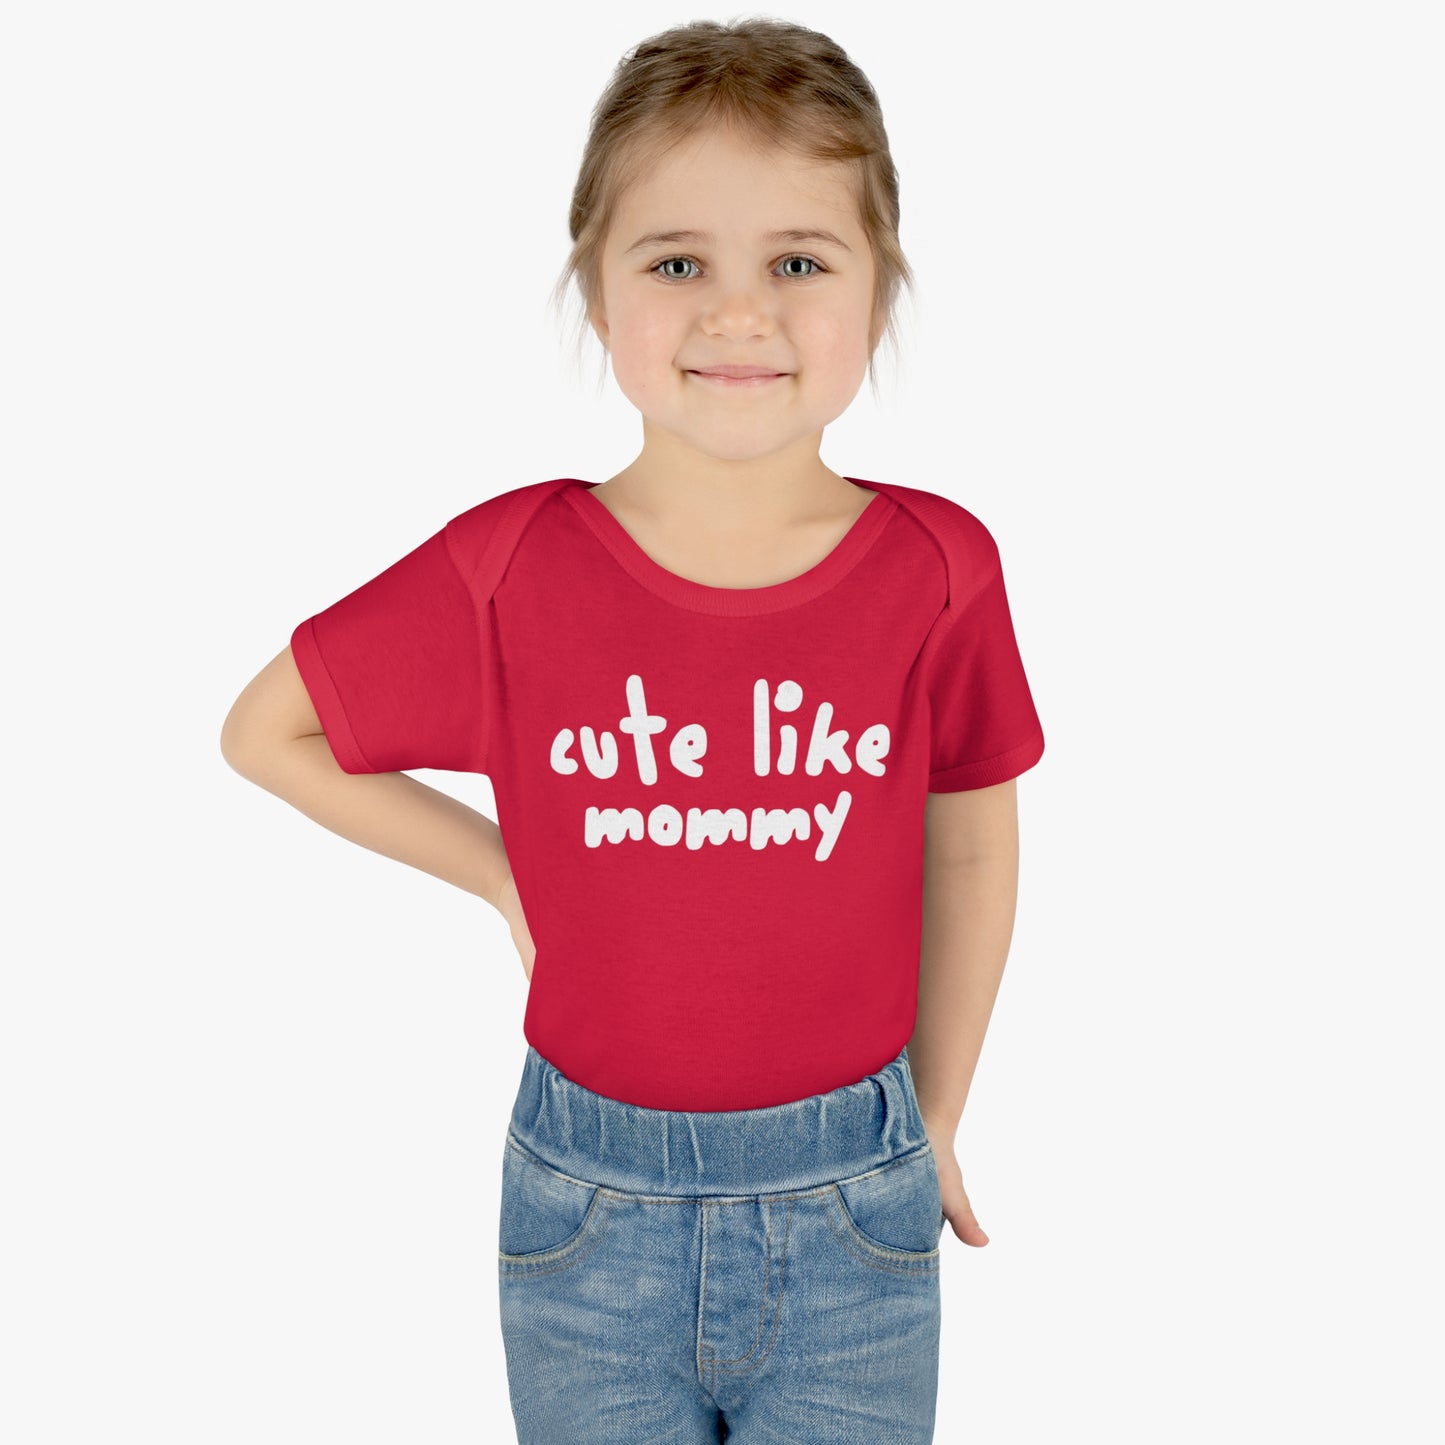 Cute Like Mommy, Smelly Like Daddy, Infant Bodysuit, Funny Fart Humor, Baby t-shirt, Snap One Piece, Playful, Hilarious T-Shirt, Shower Gift